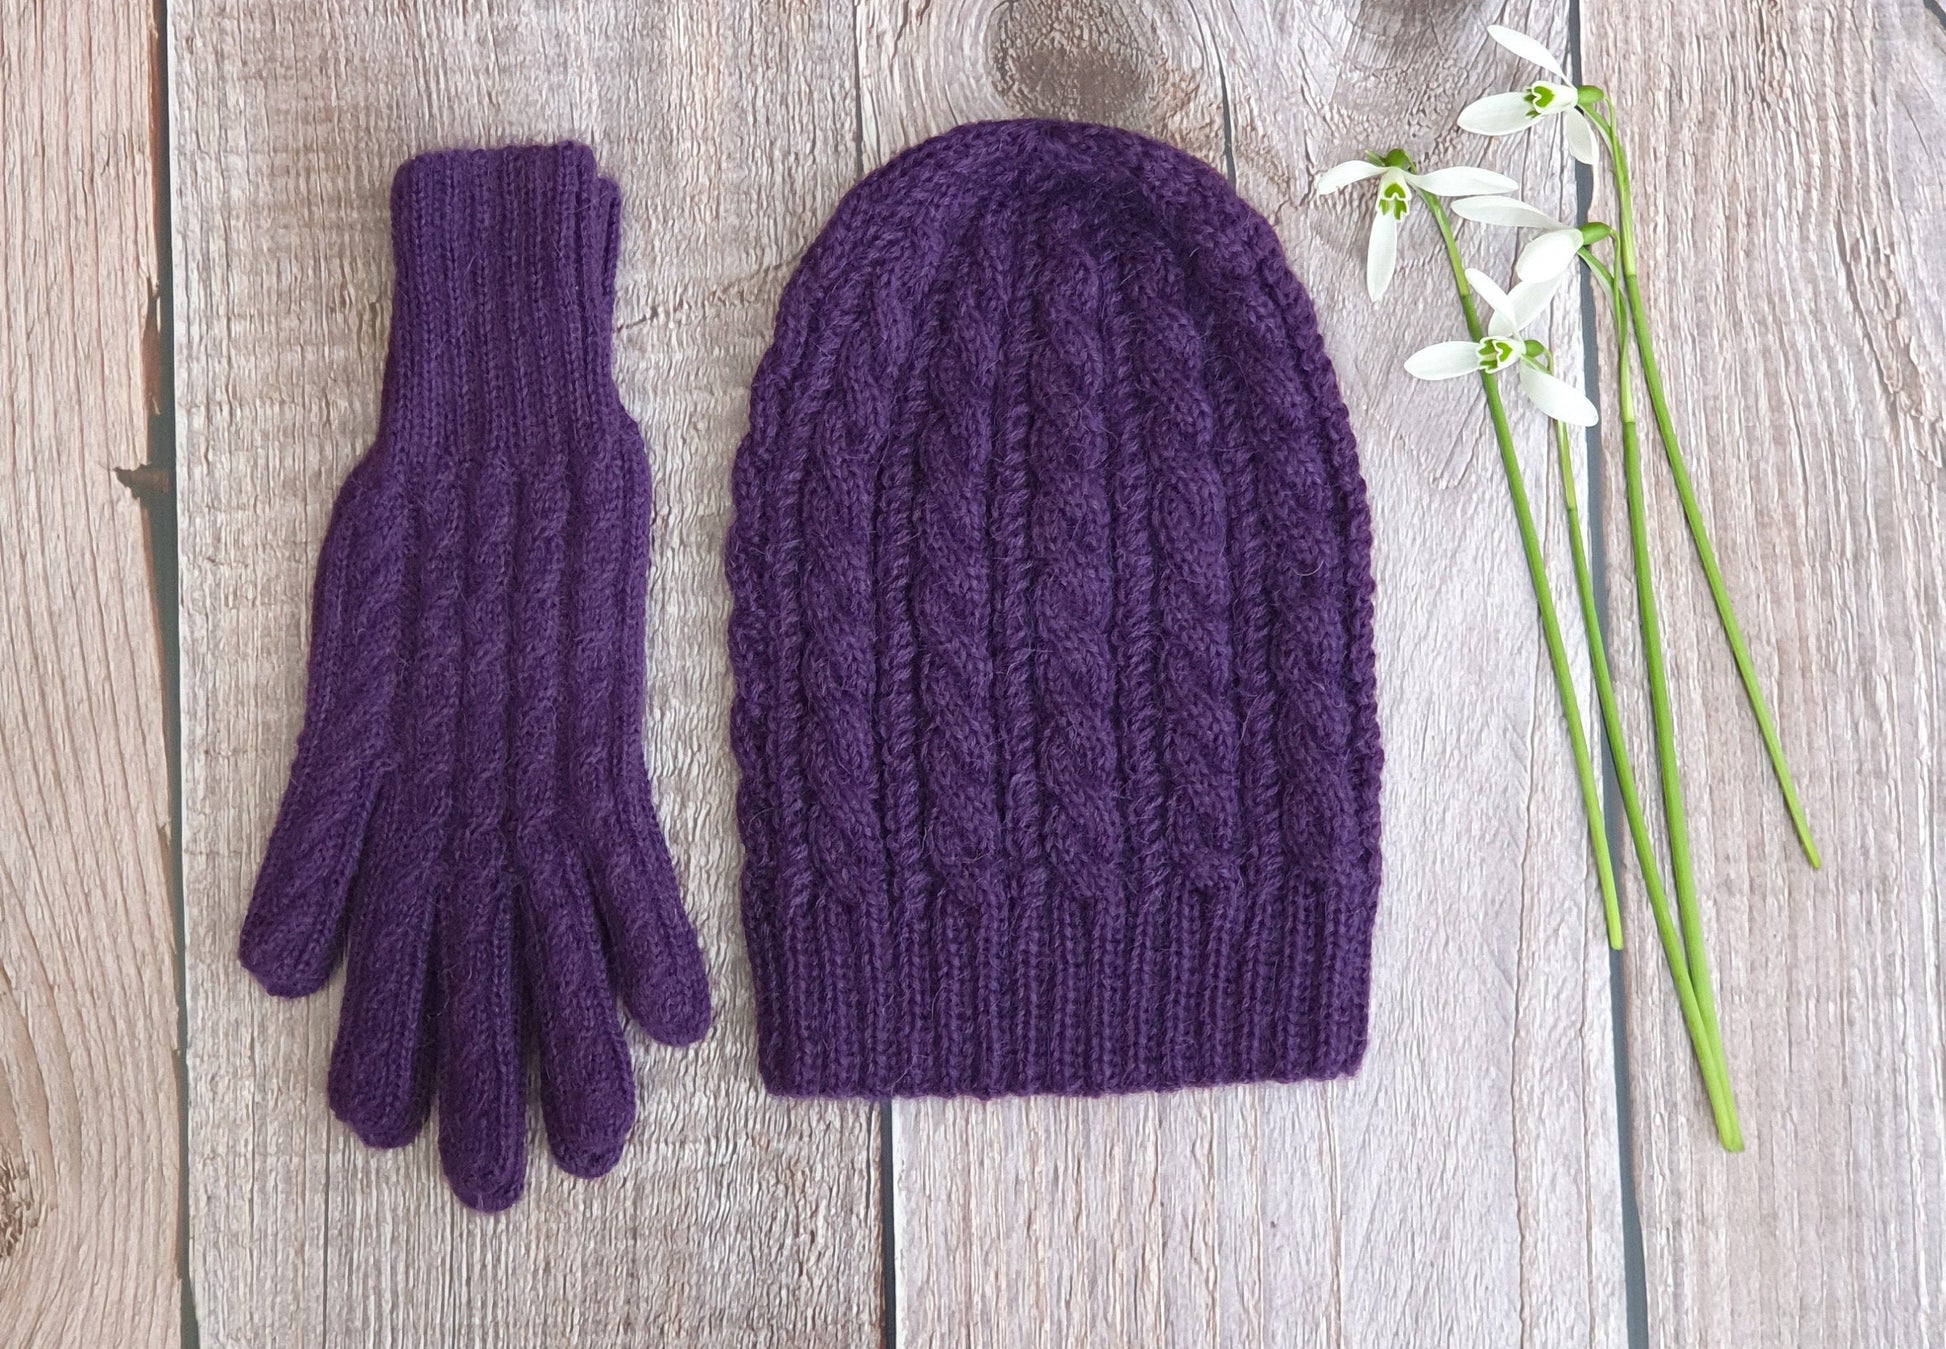 Hat and gloves set, hand knitted 100% Alpaca wool, cable knit, winter warm knit matching set. Eco friendly, plastic free, ethical, fairtrade